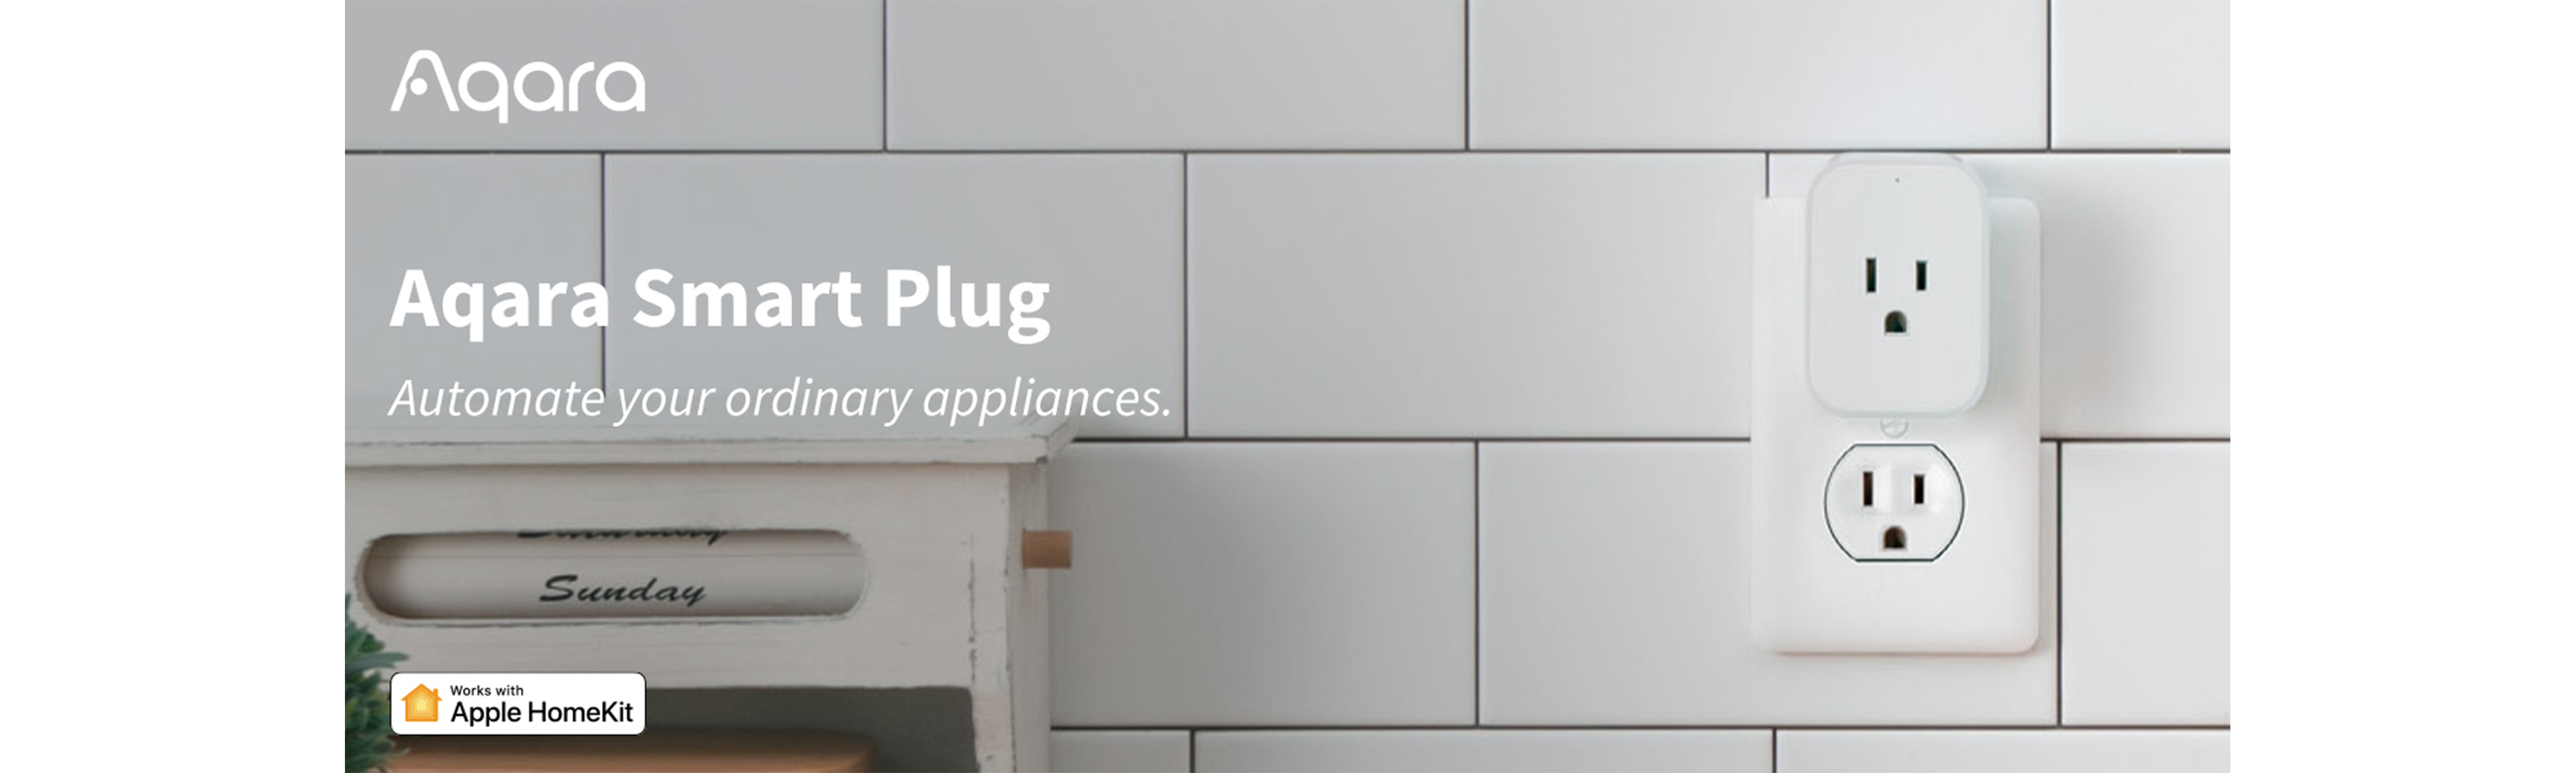 Aqara Smart Plug, Requires AQARA HUB, Zigbee, with Energy Monitoring,  Overload Protection, Scheduling and Voice Control, Works with Alexa, Google